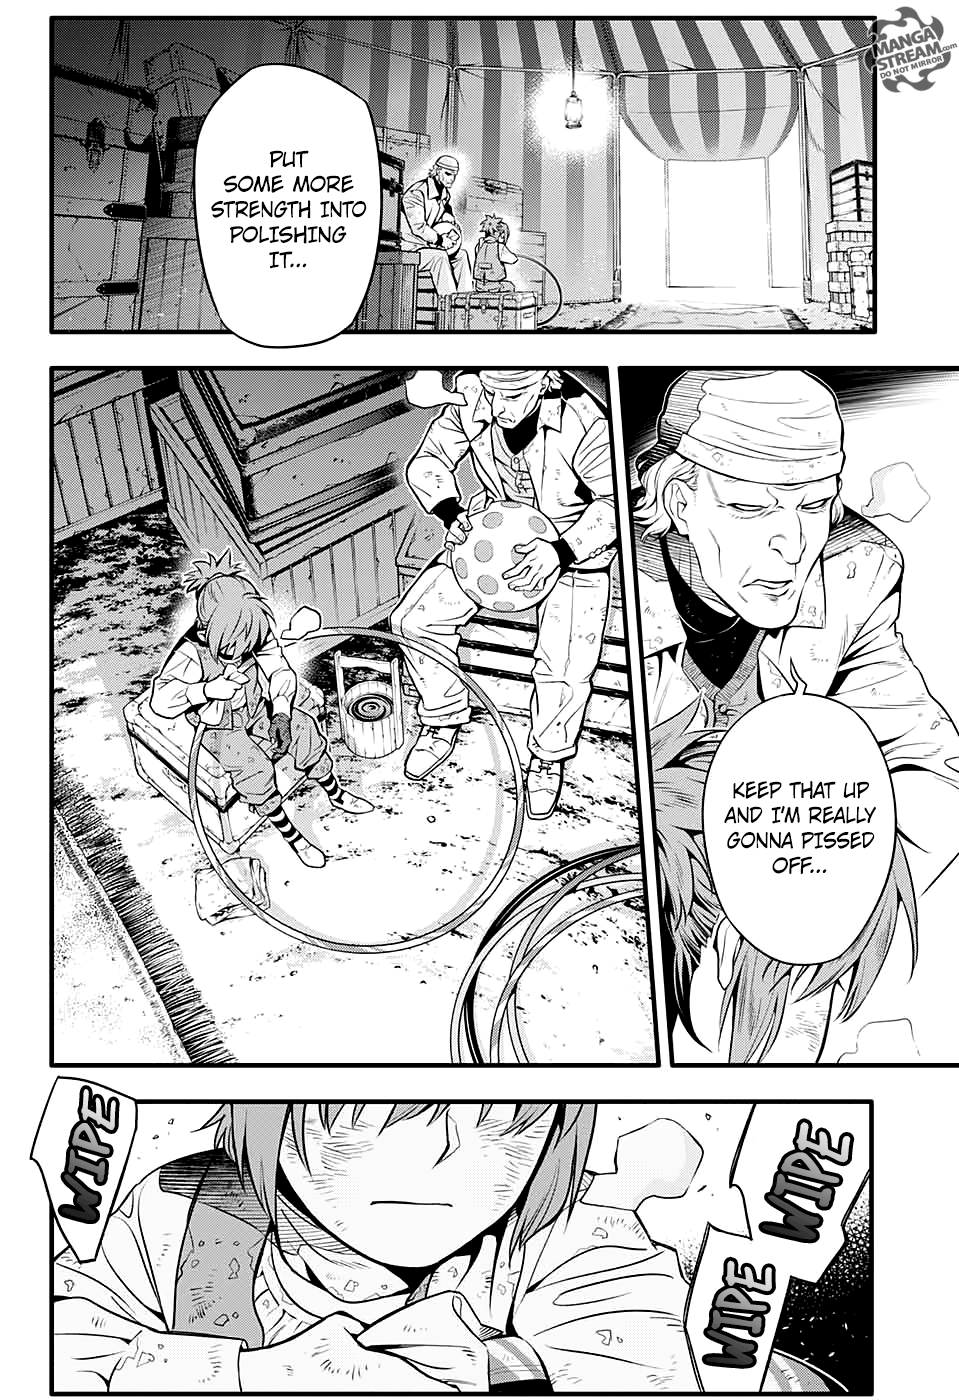 D.Gray-man chapter 232 page 14